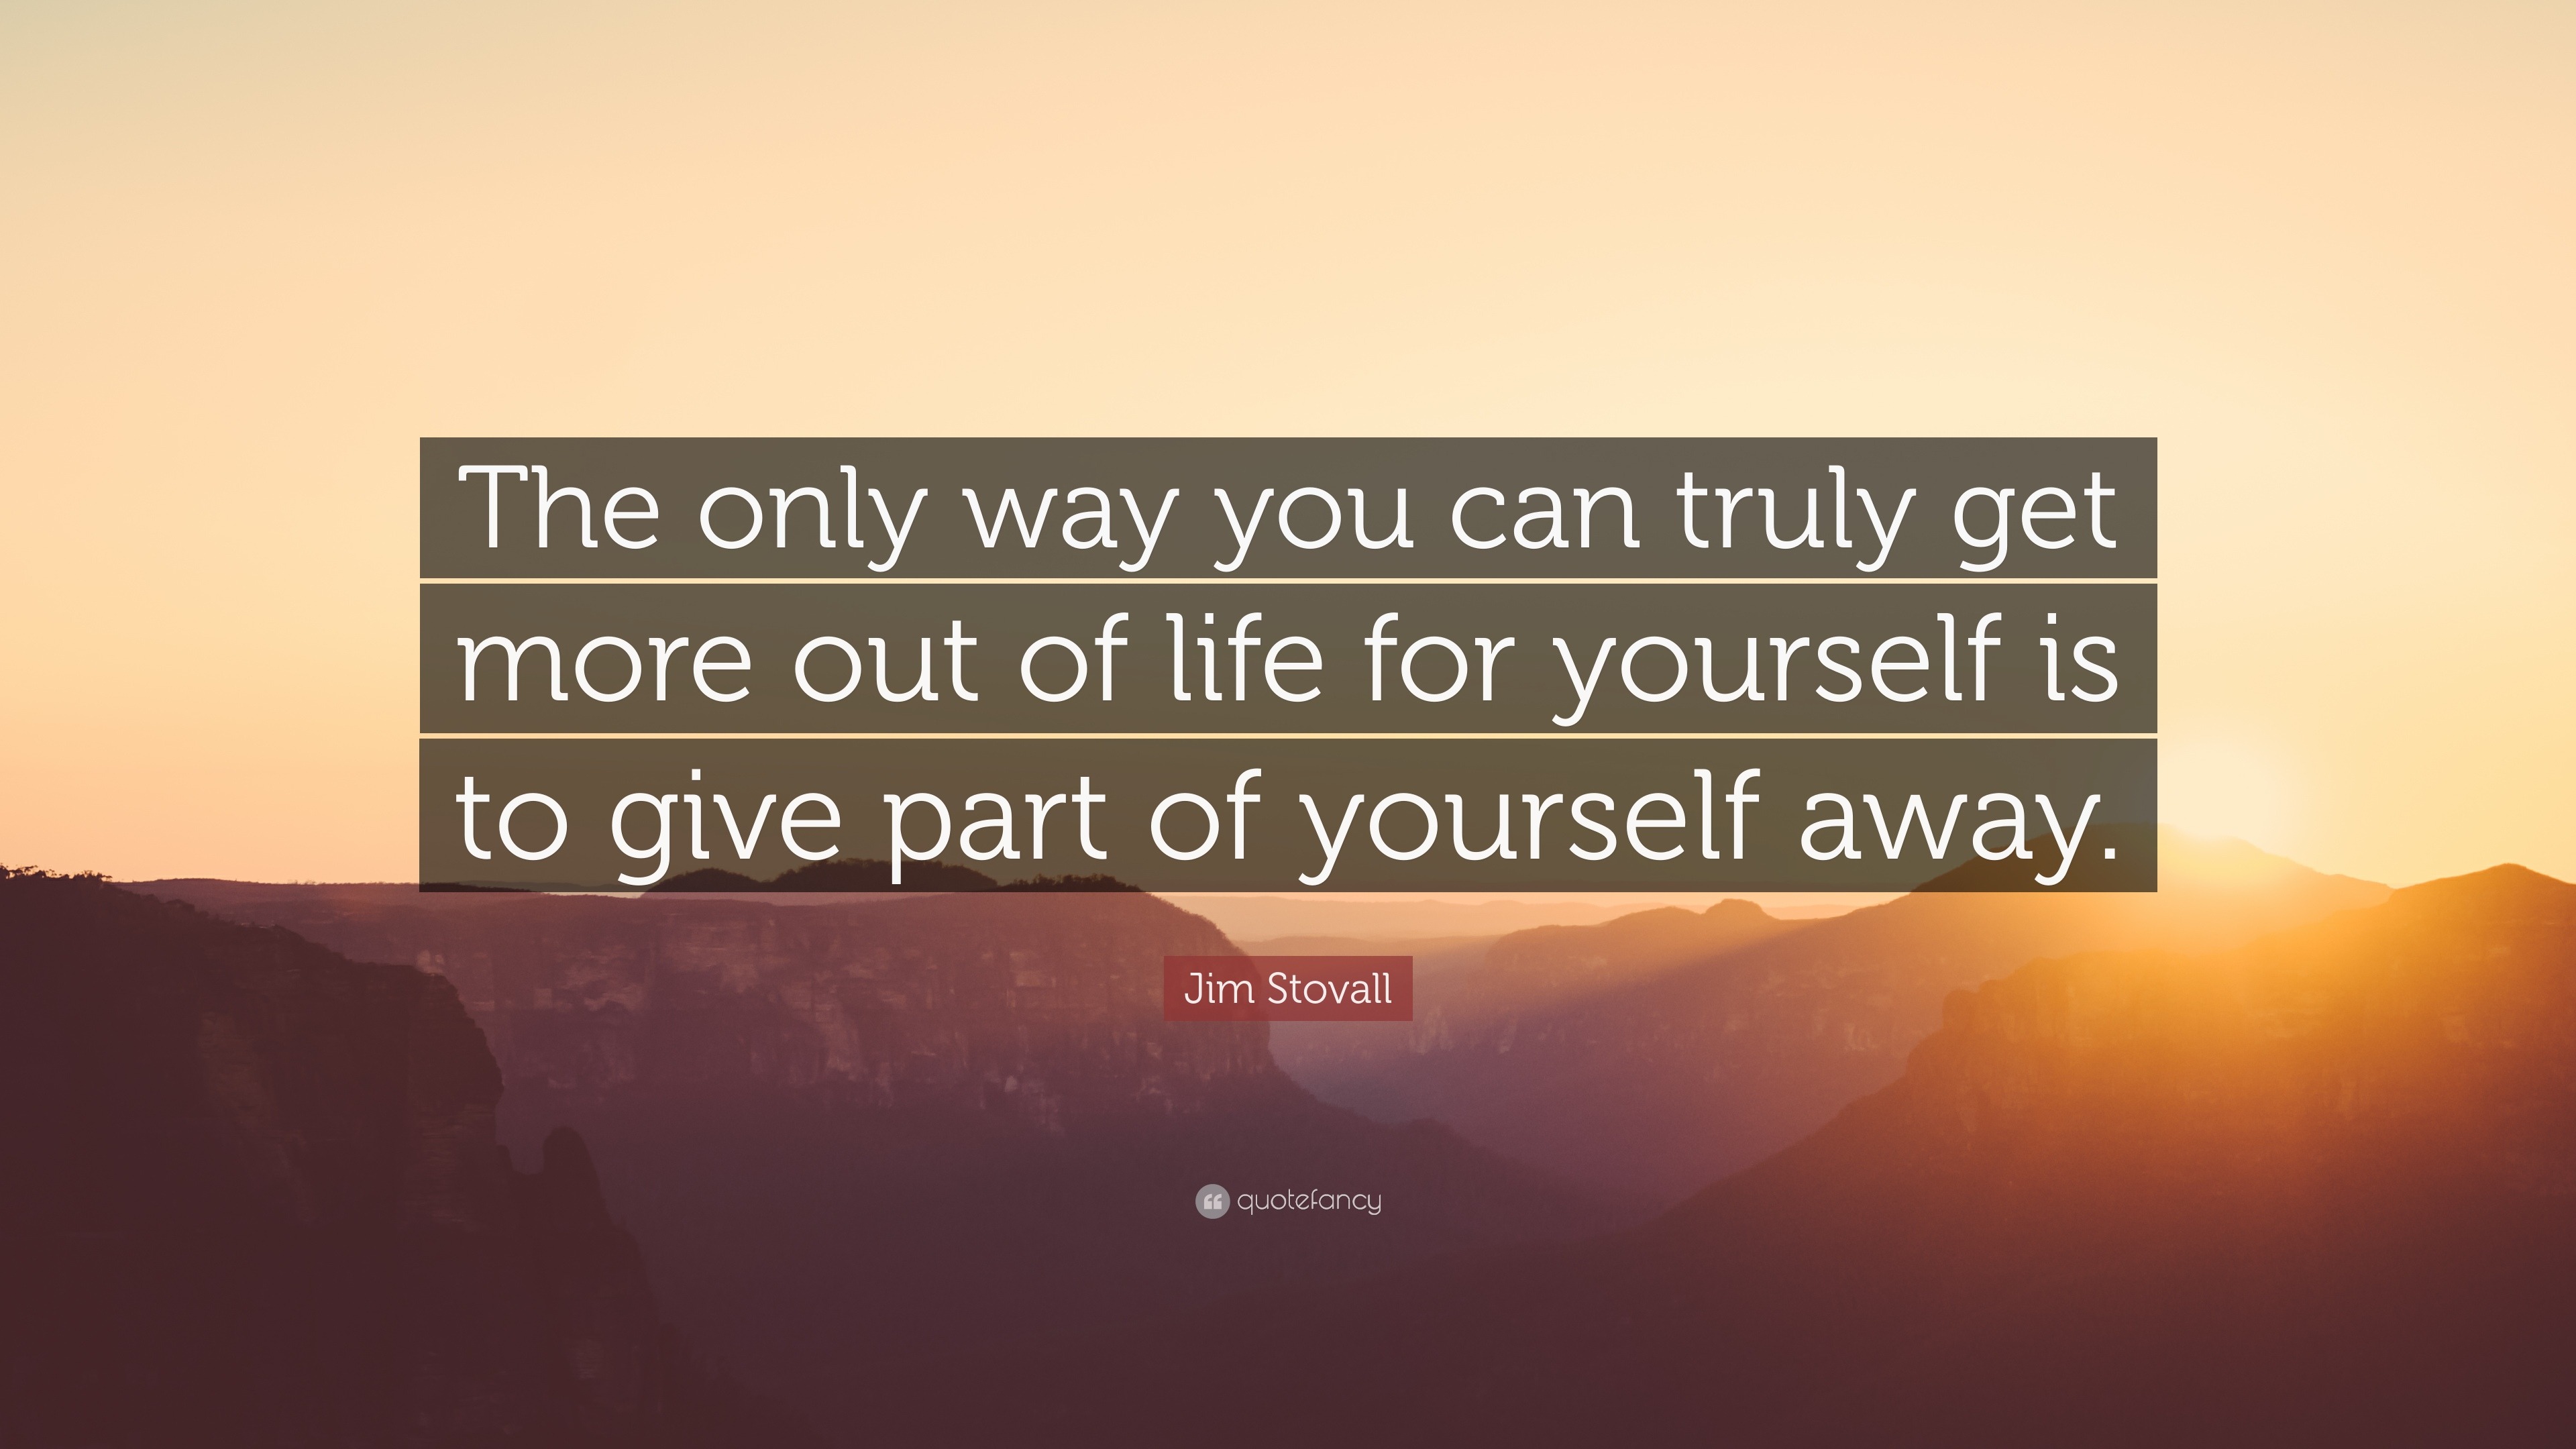 Jim Stovall Quote: “The only way you can truly get more out of life for  yourself